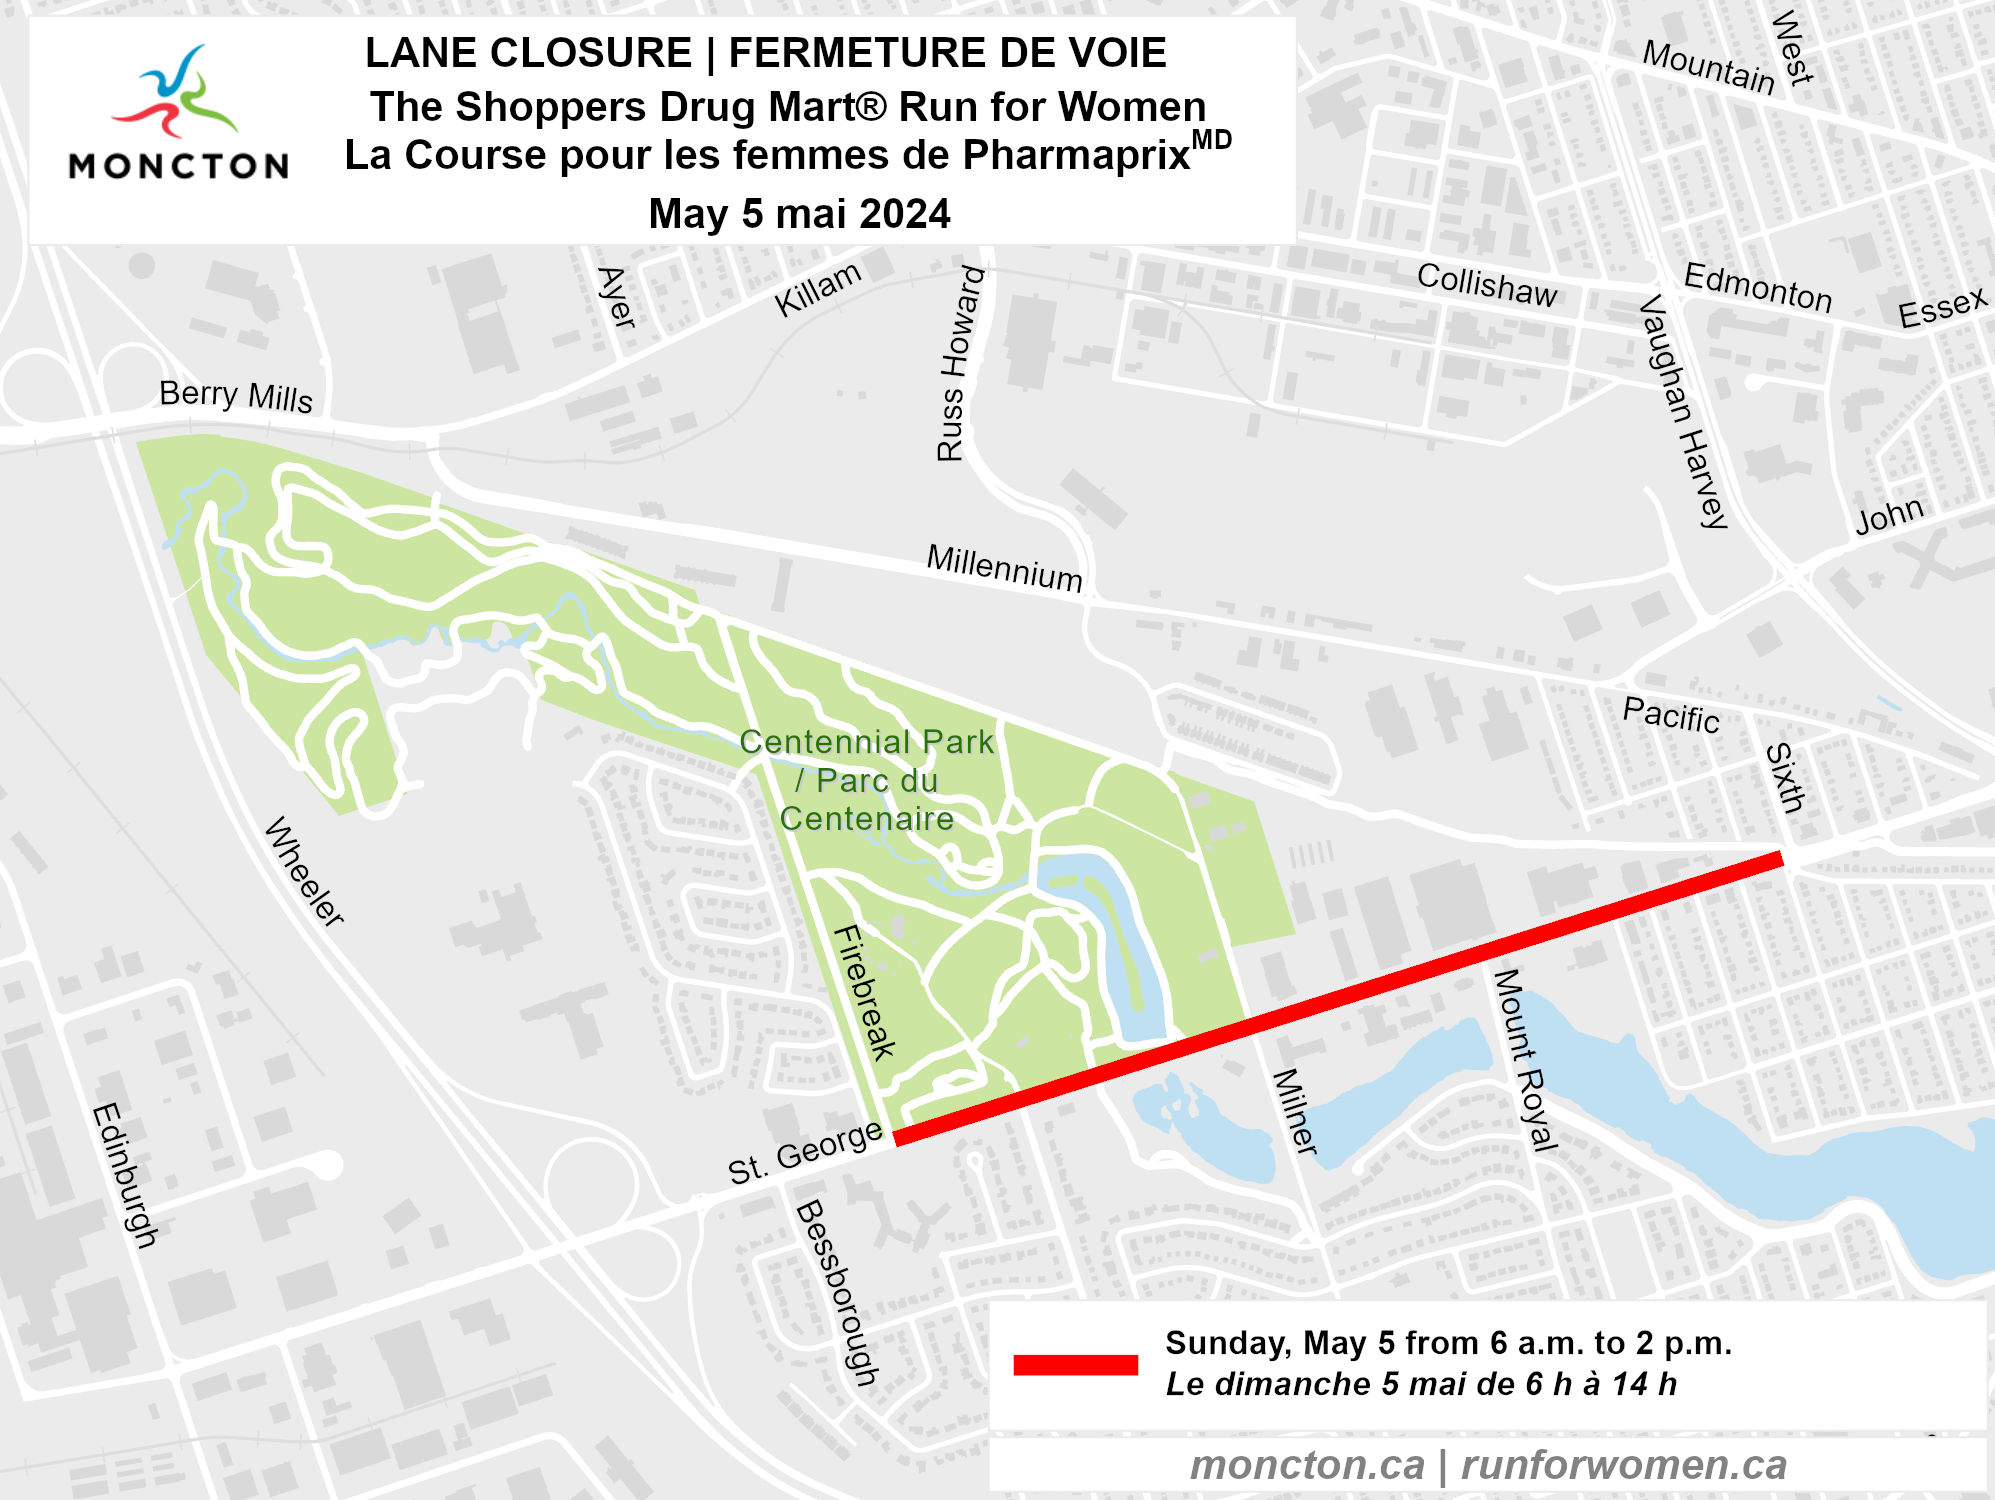 Street closure map for the Shoppers Drug Mart Run for Women